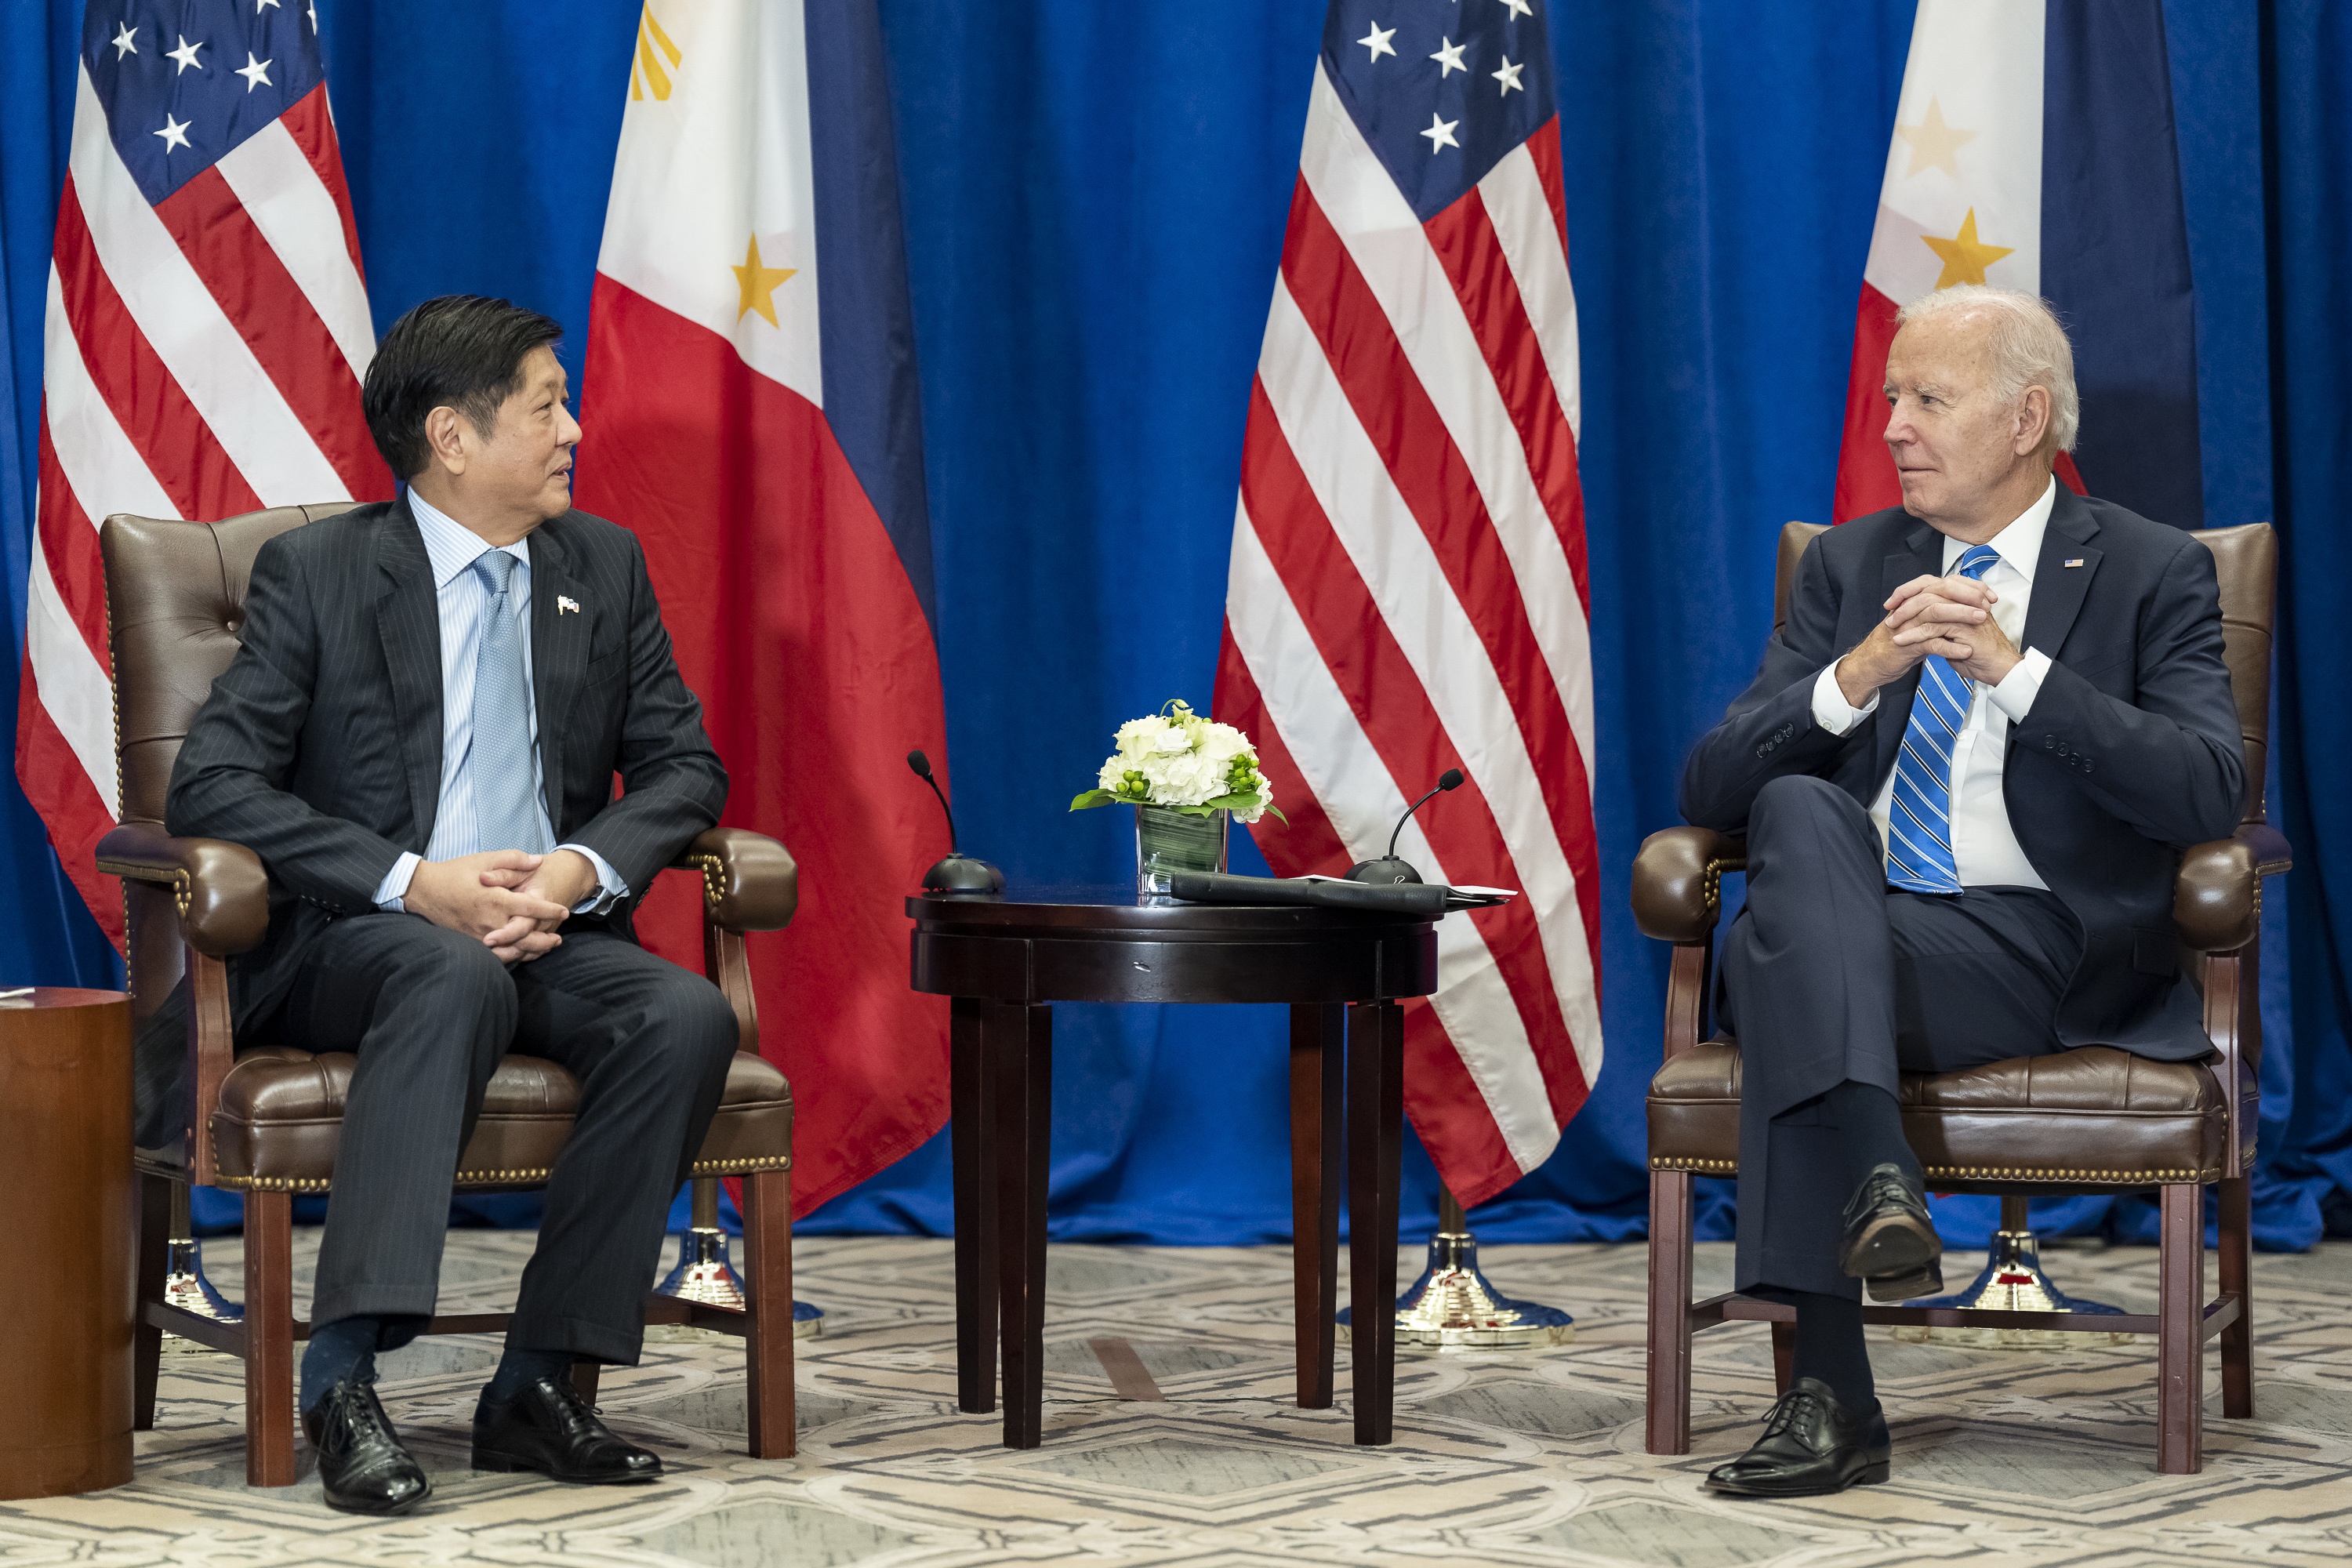 President Biden on X: "Today I met with President Marcos of the Philippines. Our nations' relationship is rooted in democracy, common history, and people-to-people ties, including millions of Filipino-Americans who enrich our